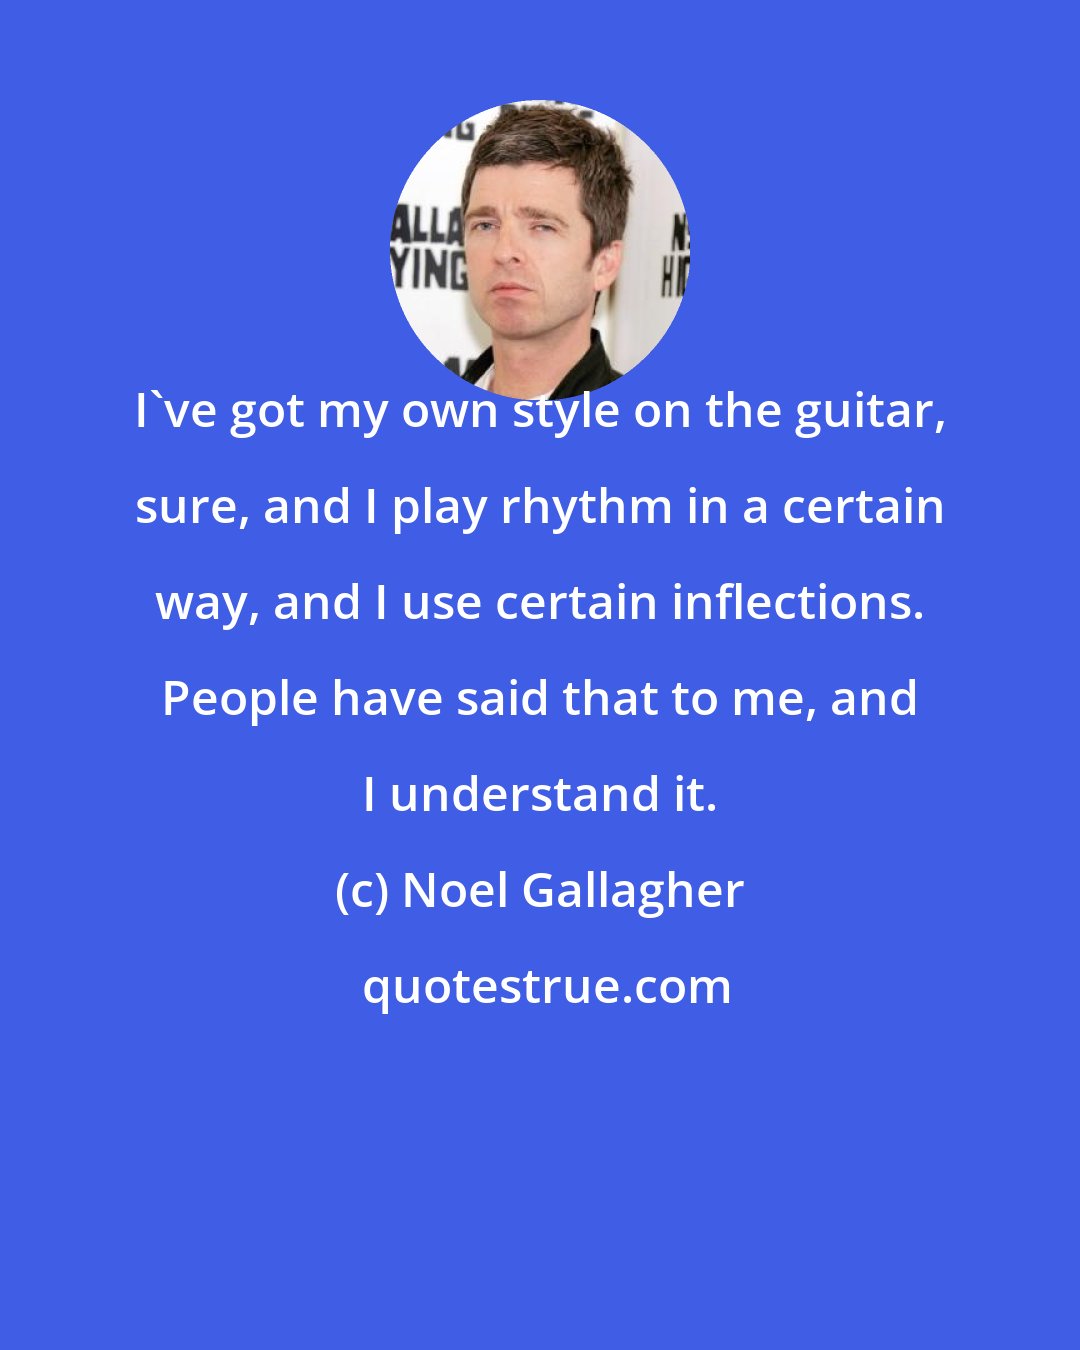 Noel Gallagher: I've got my own style on the guitar, sure, and I play rhythm in a certain way, and I use certain inflections. People have said that to me, and I understand it.